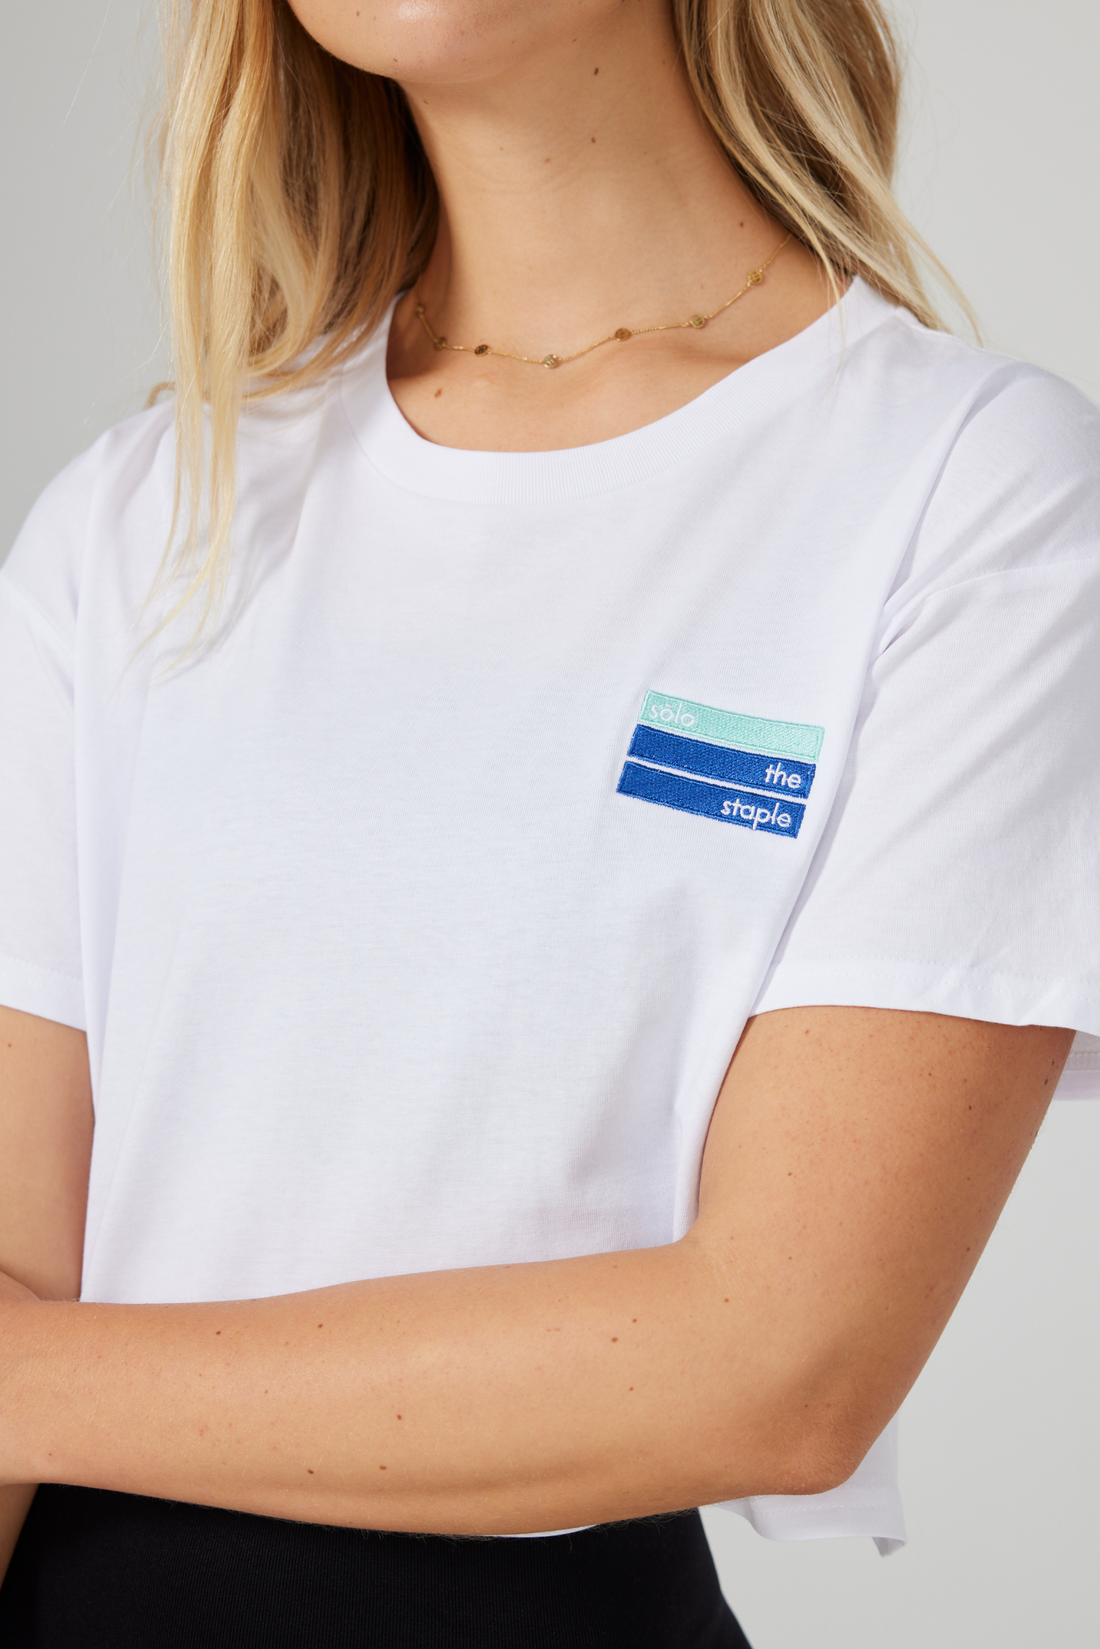 Sideline Cropped Tee - White